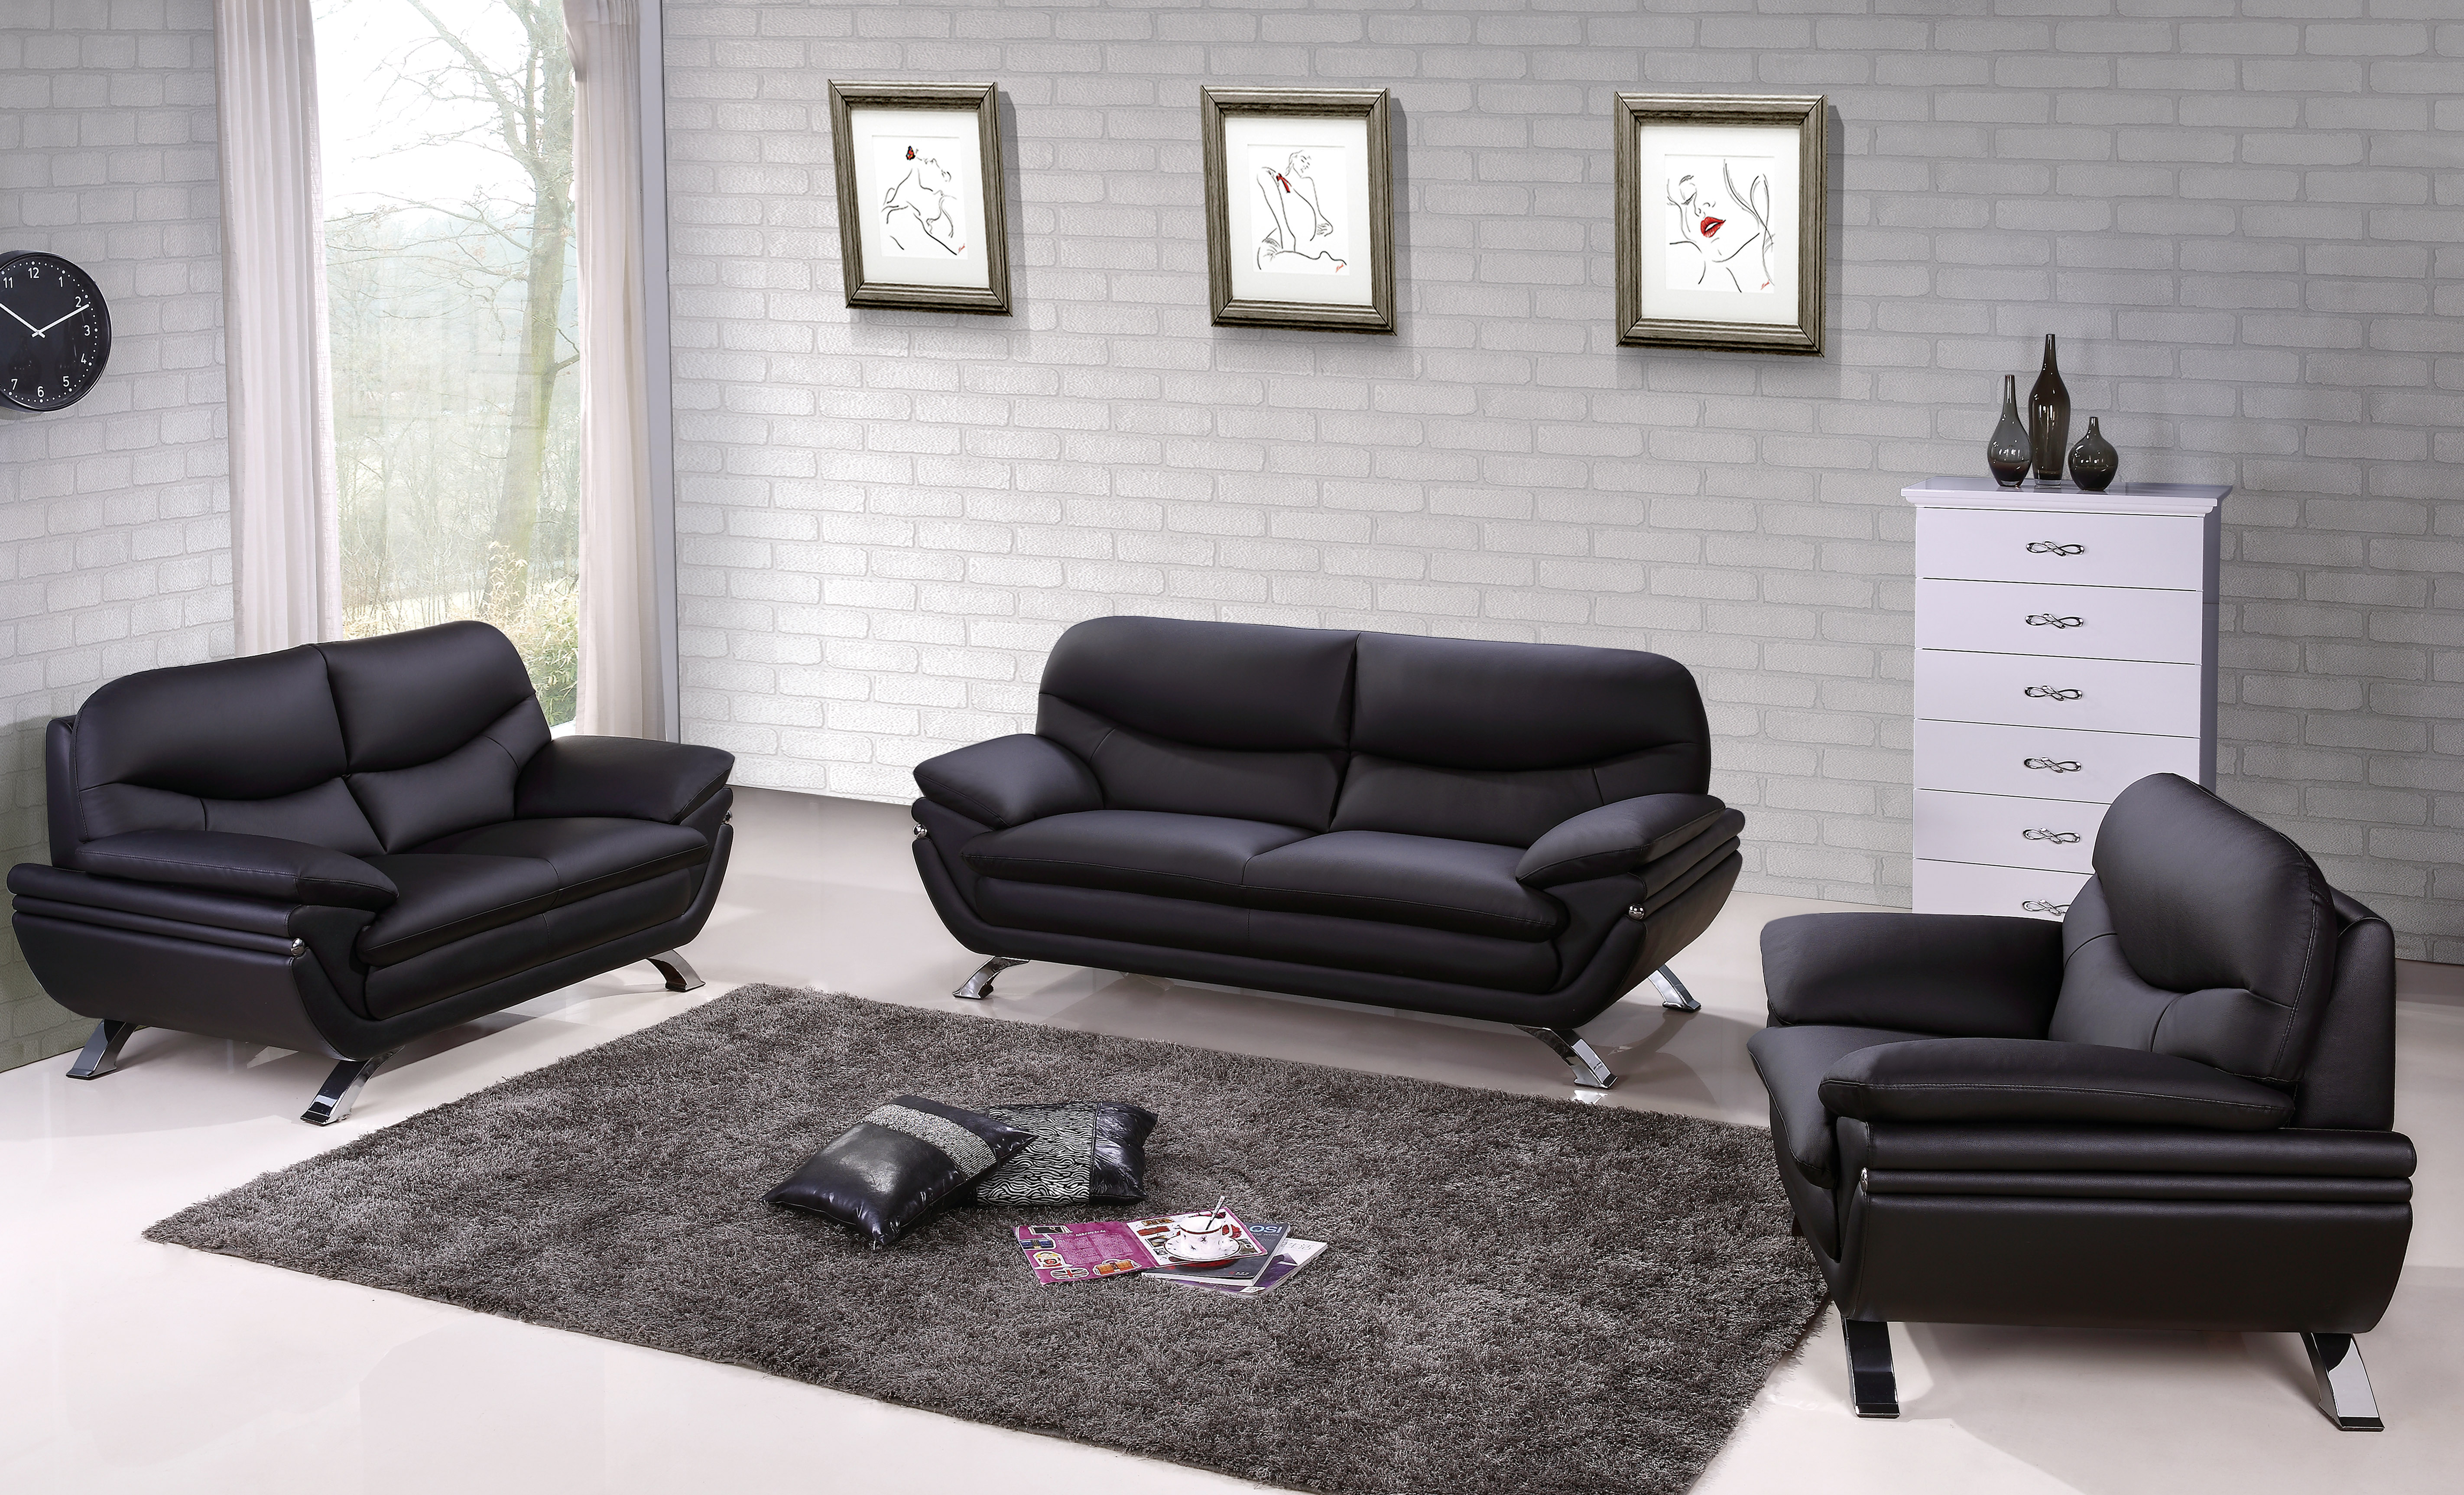 Harmony Ying Yang Contemporary Leather Living Room Sofa ...